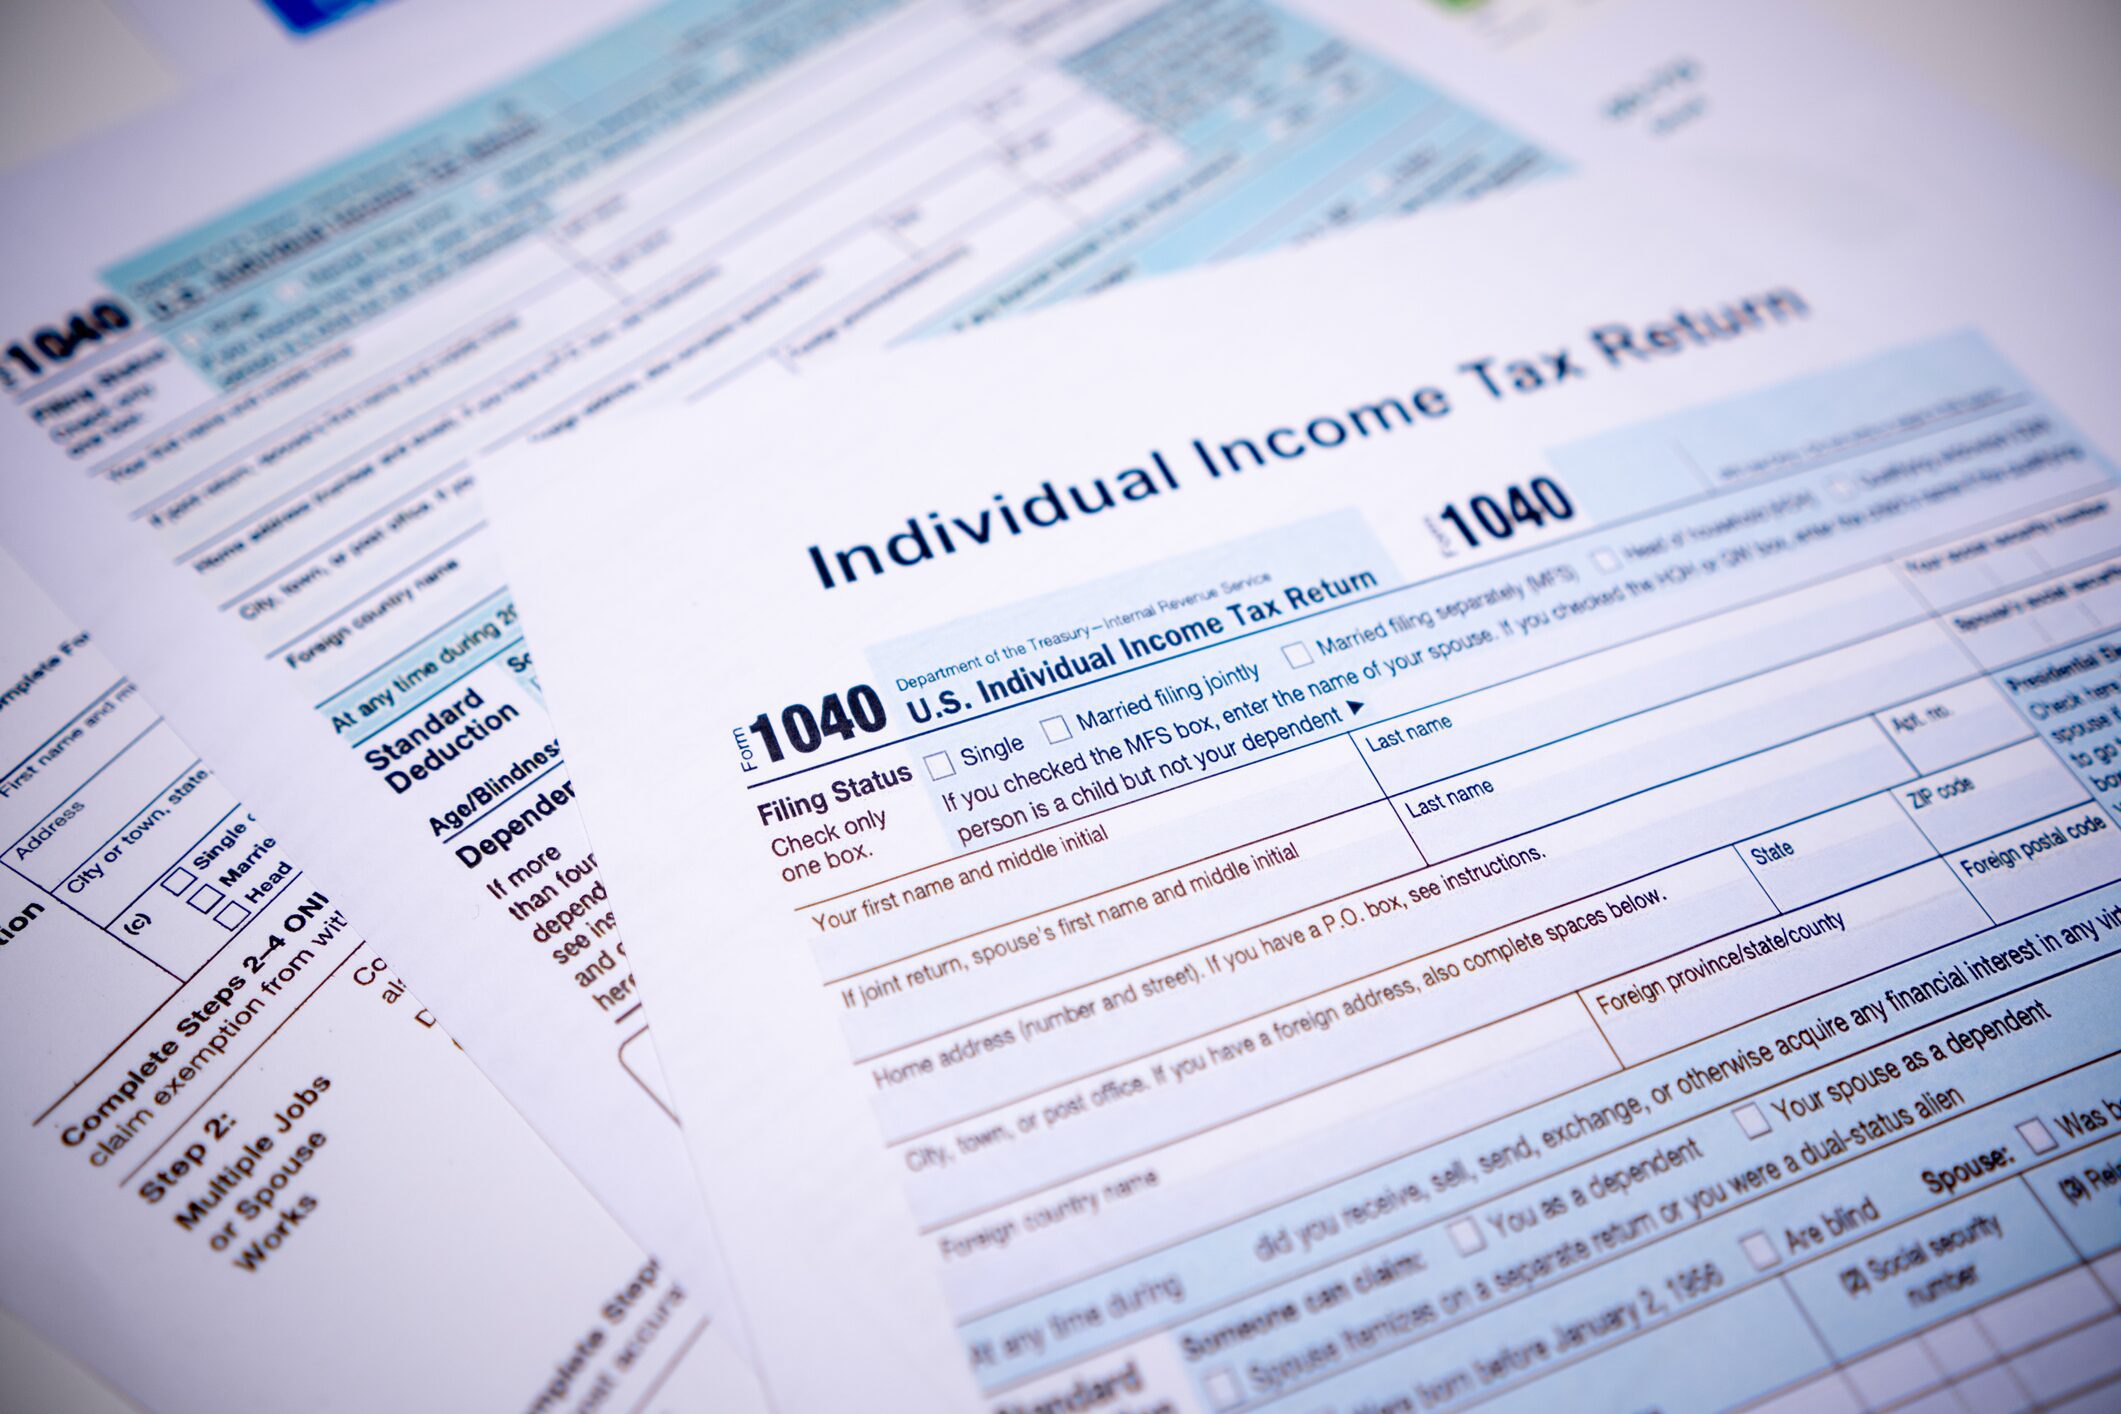 Filing a tax return can help you take advatnage of certain tax credits, deductions and more.